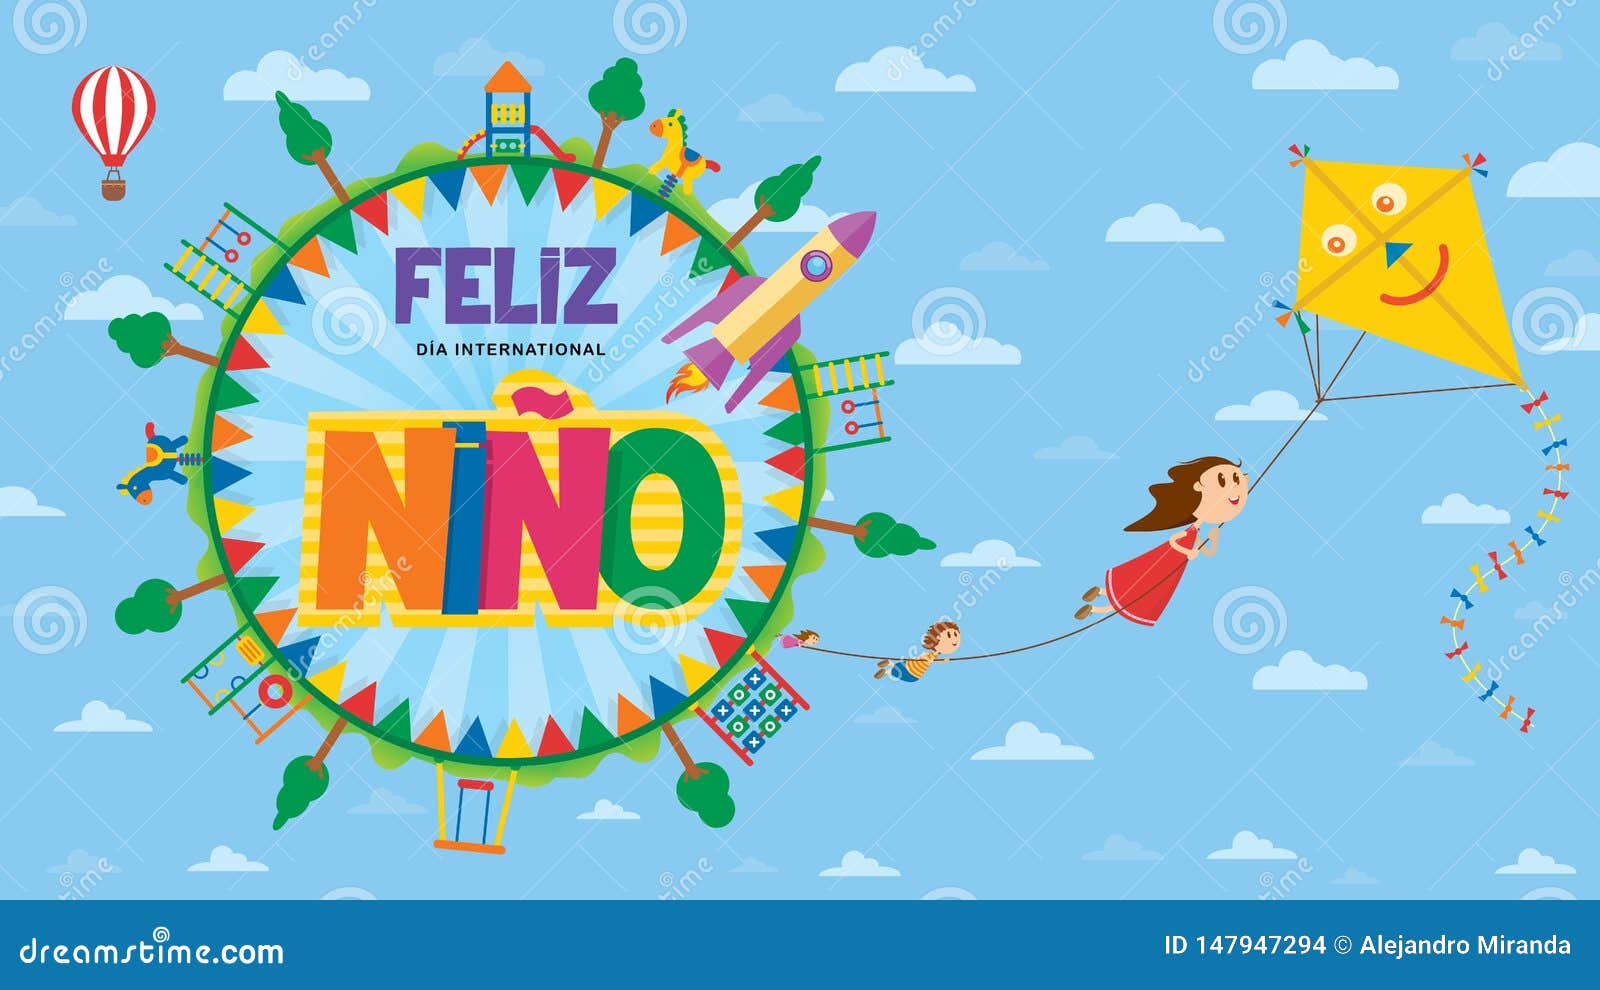 feliz dia del nino greeting card - happy children`s day in spanish language. text inside a circle surrounded by playgrounds